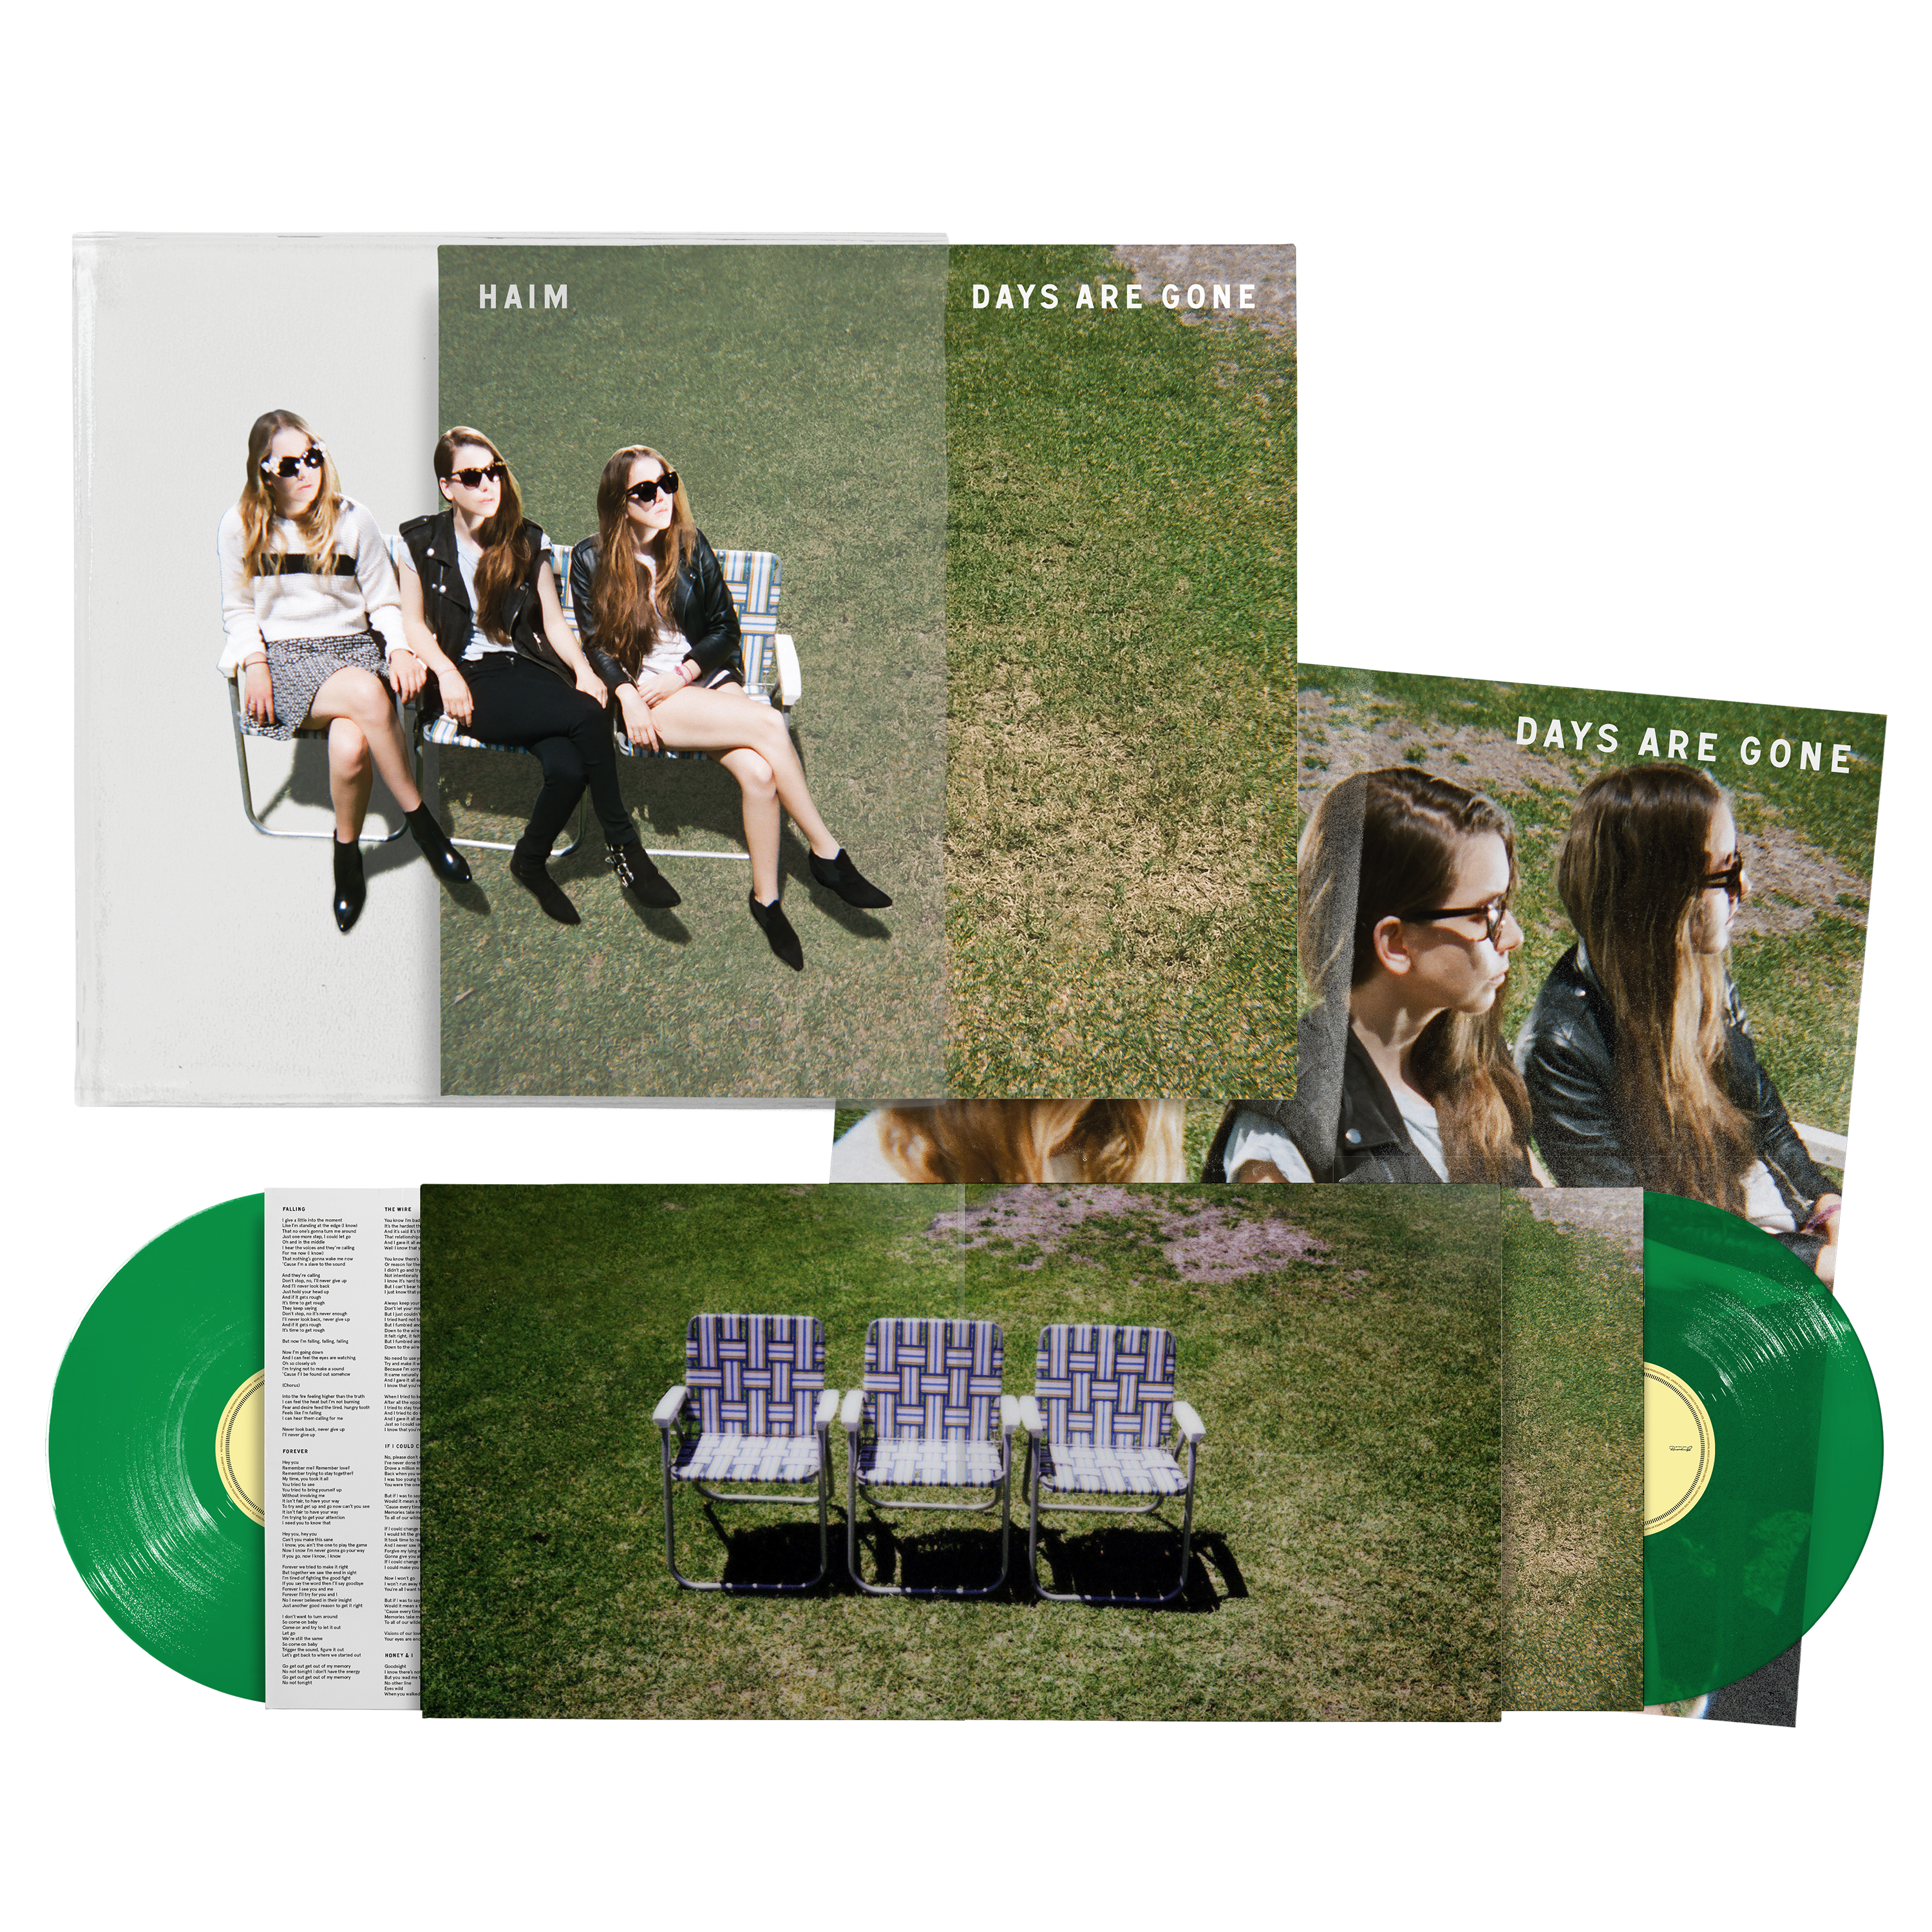 Days Are Gone (10th Anniversary): Transparent Green Vinyl 2LP, Picture Disc, Cassette + Signed Art Card